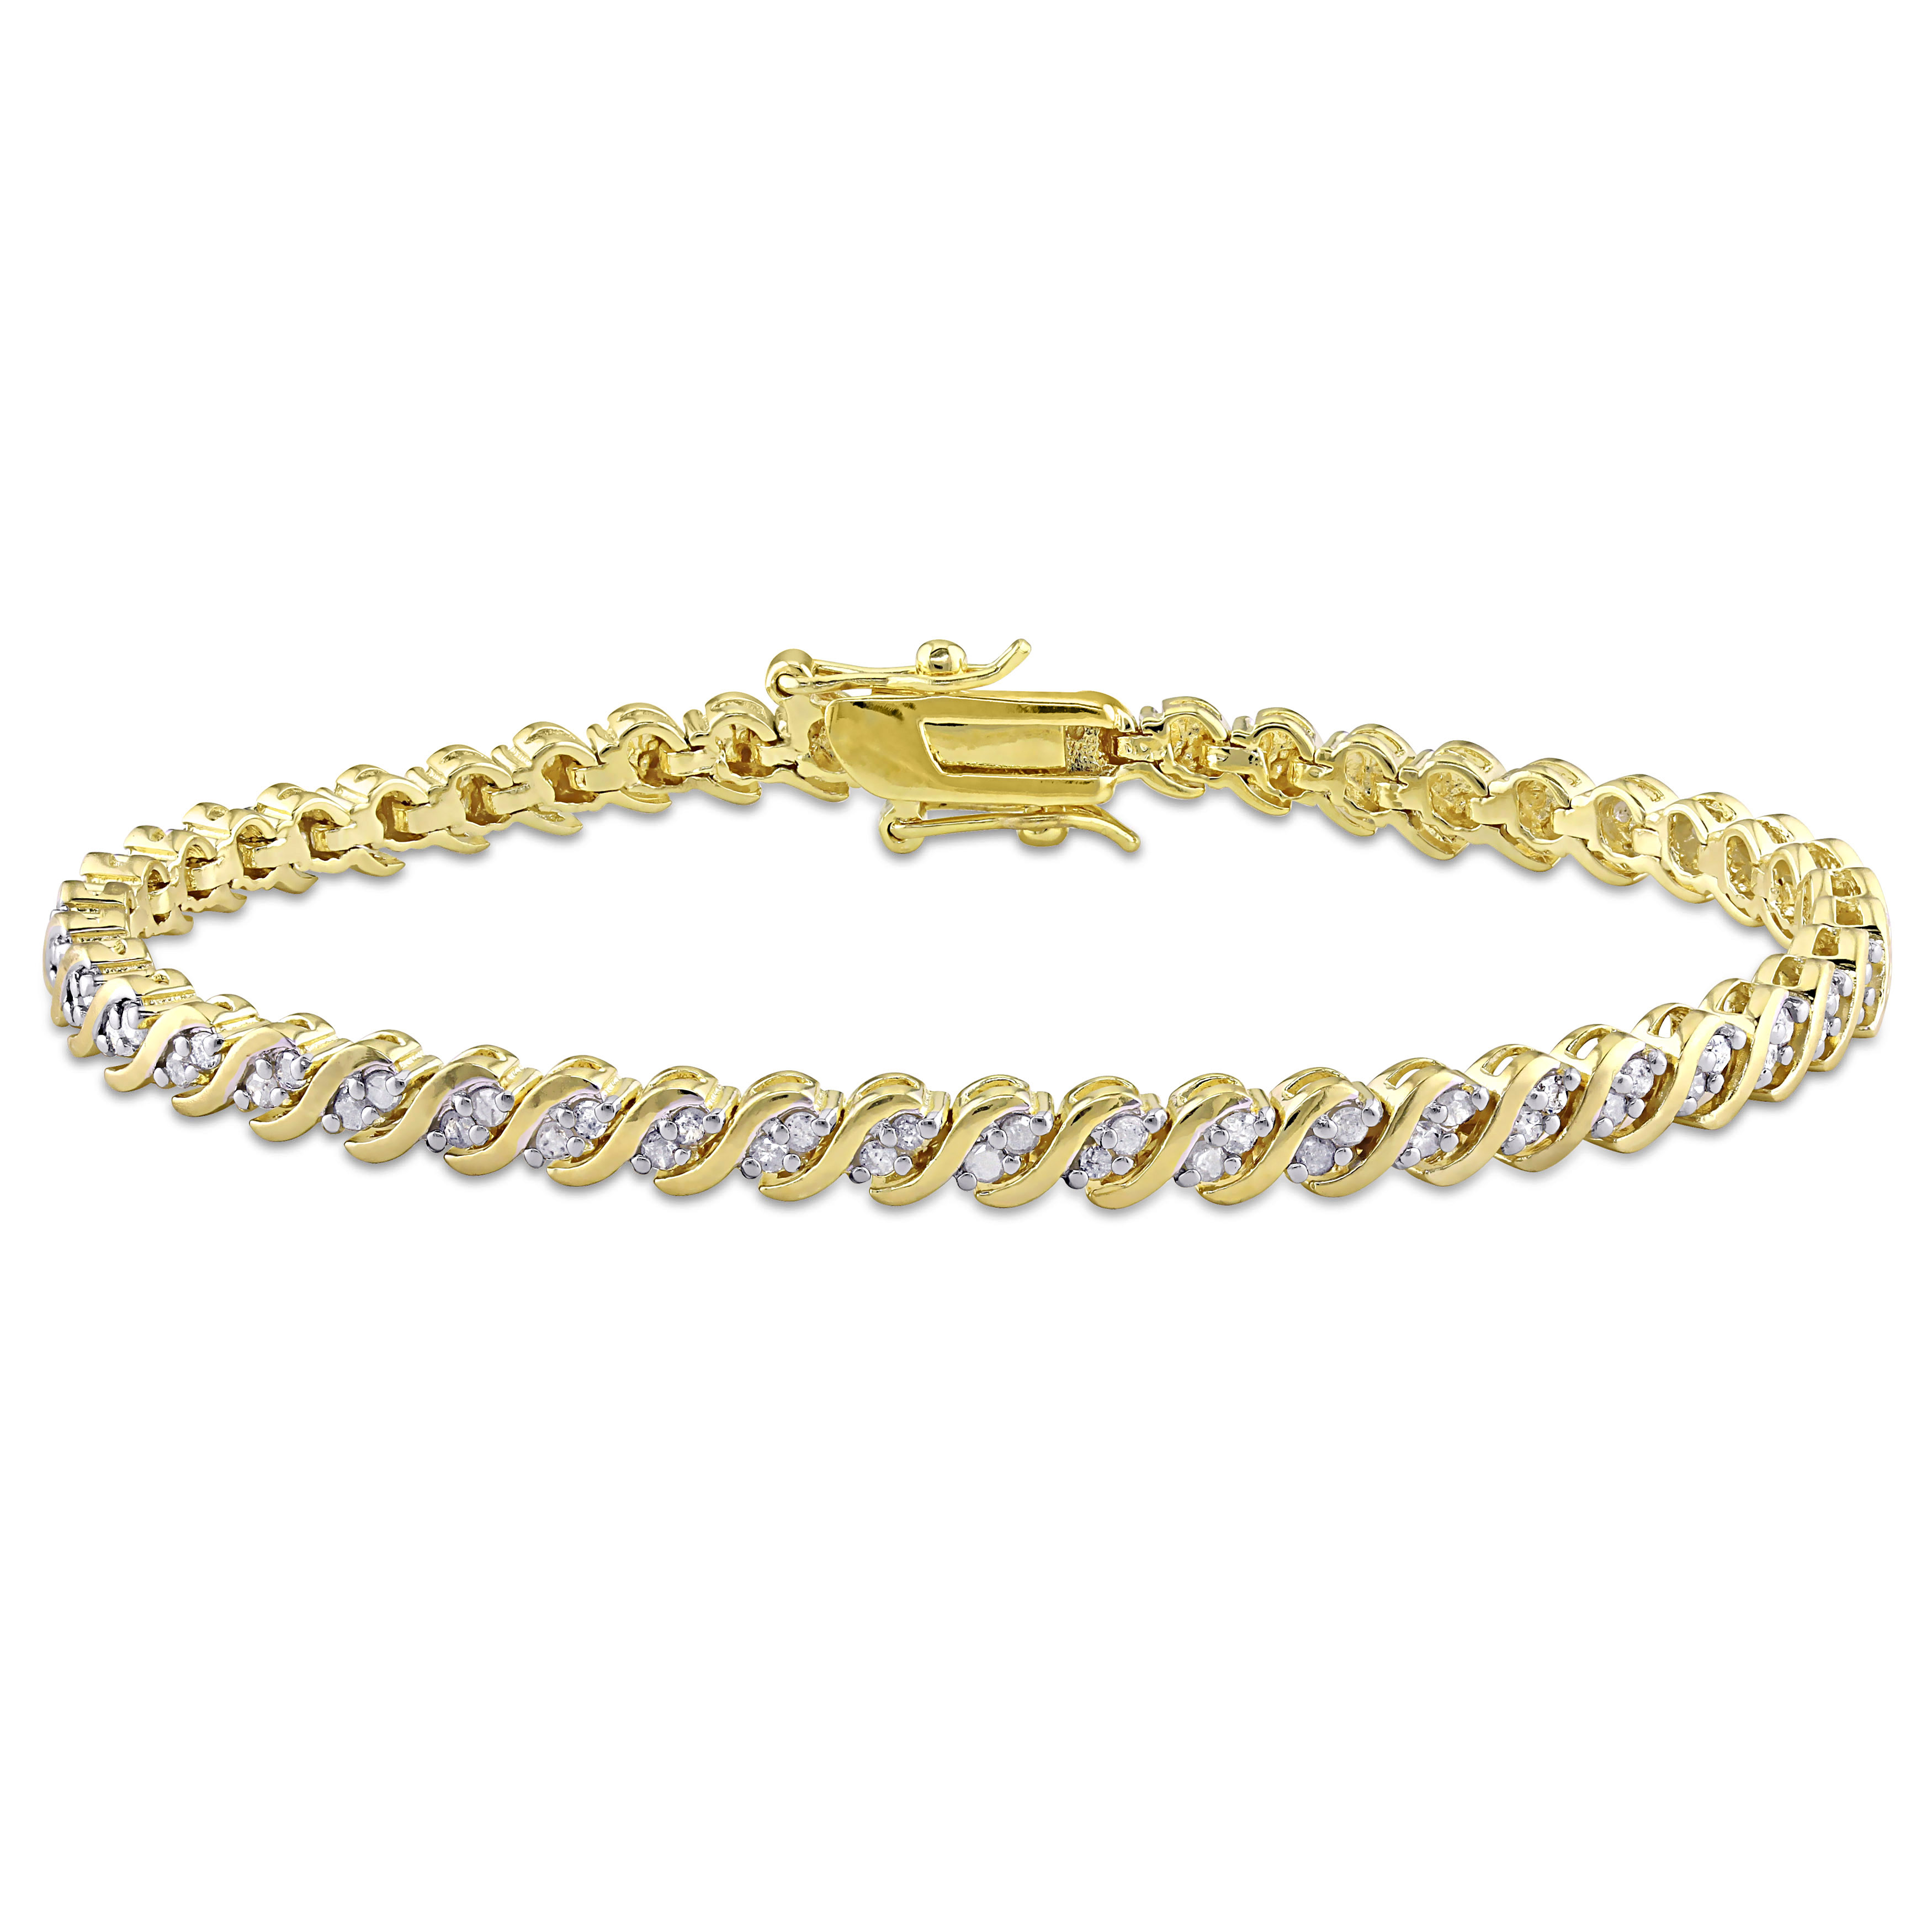 1 CT TW Diamond "S" Link Tennis Bracelet in Yellow Plated Sterling Silver - 7.5 in.